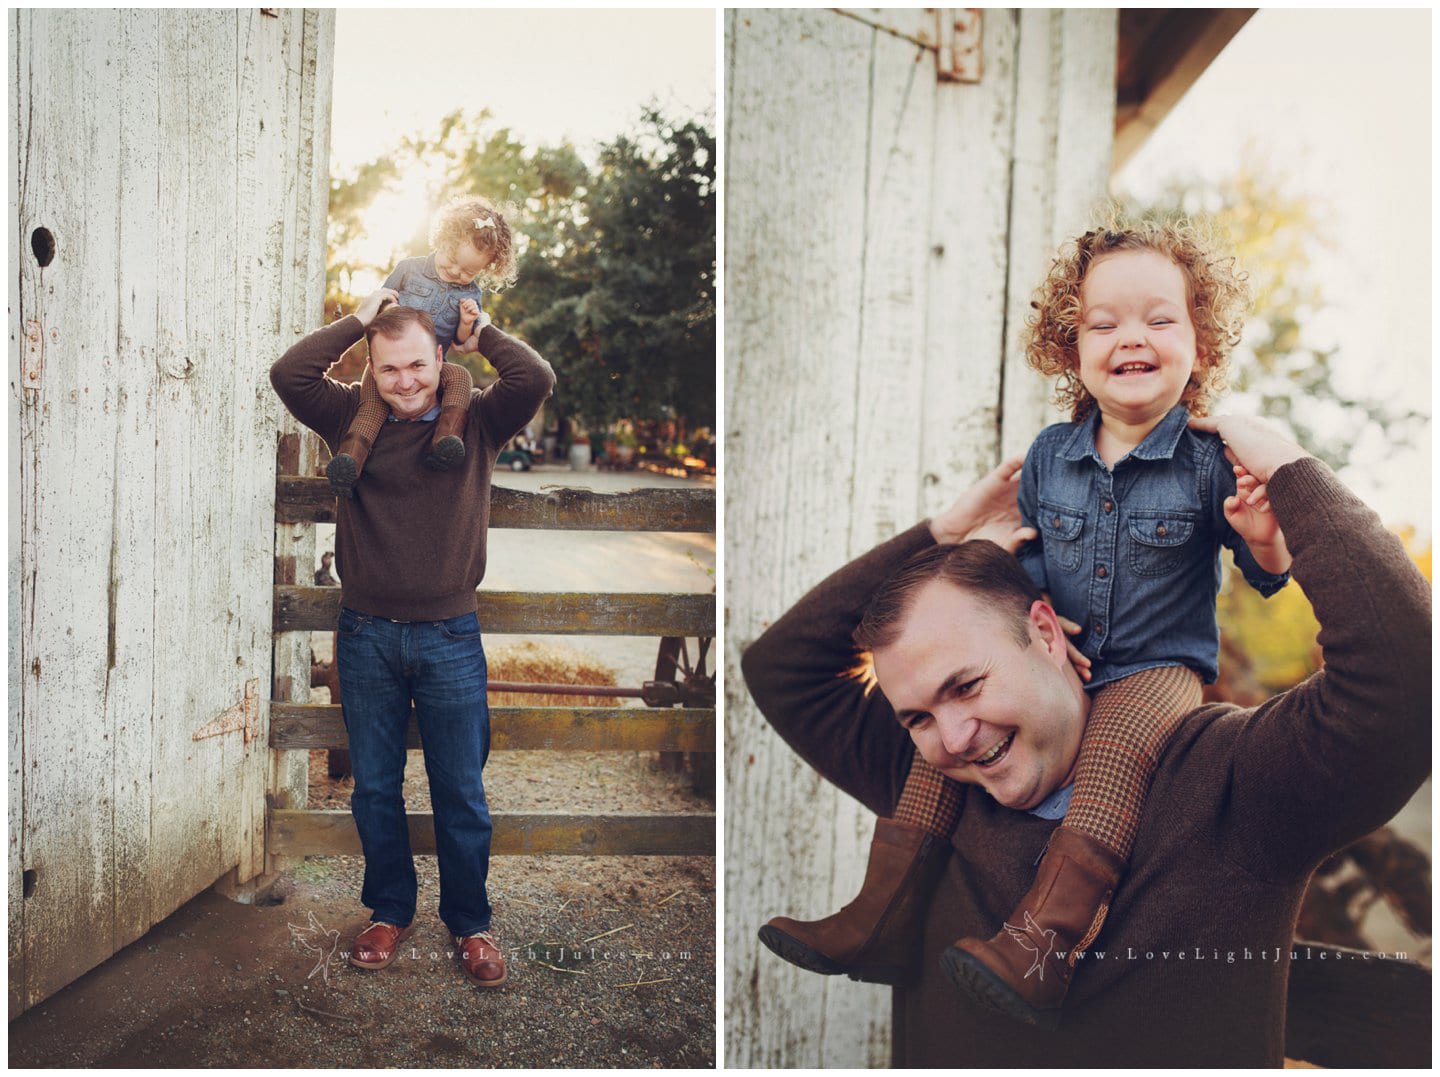 dad-and-baby-playing-at-barn-for-photo-shoot-in-sacramento-area